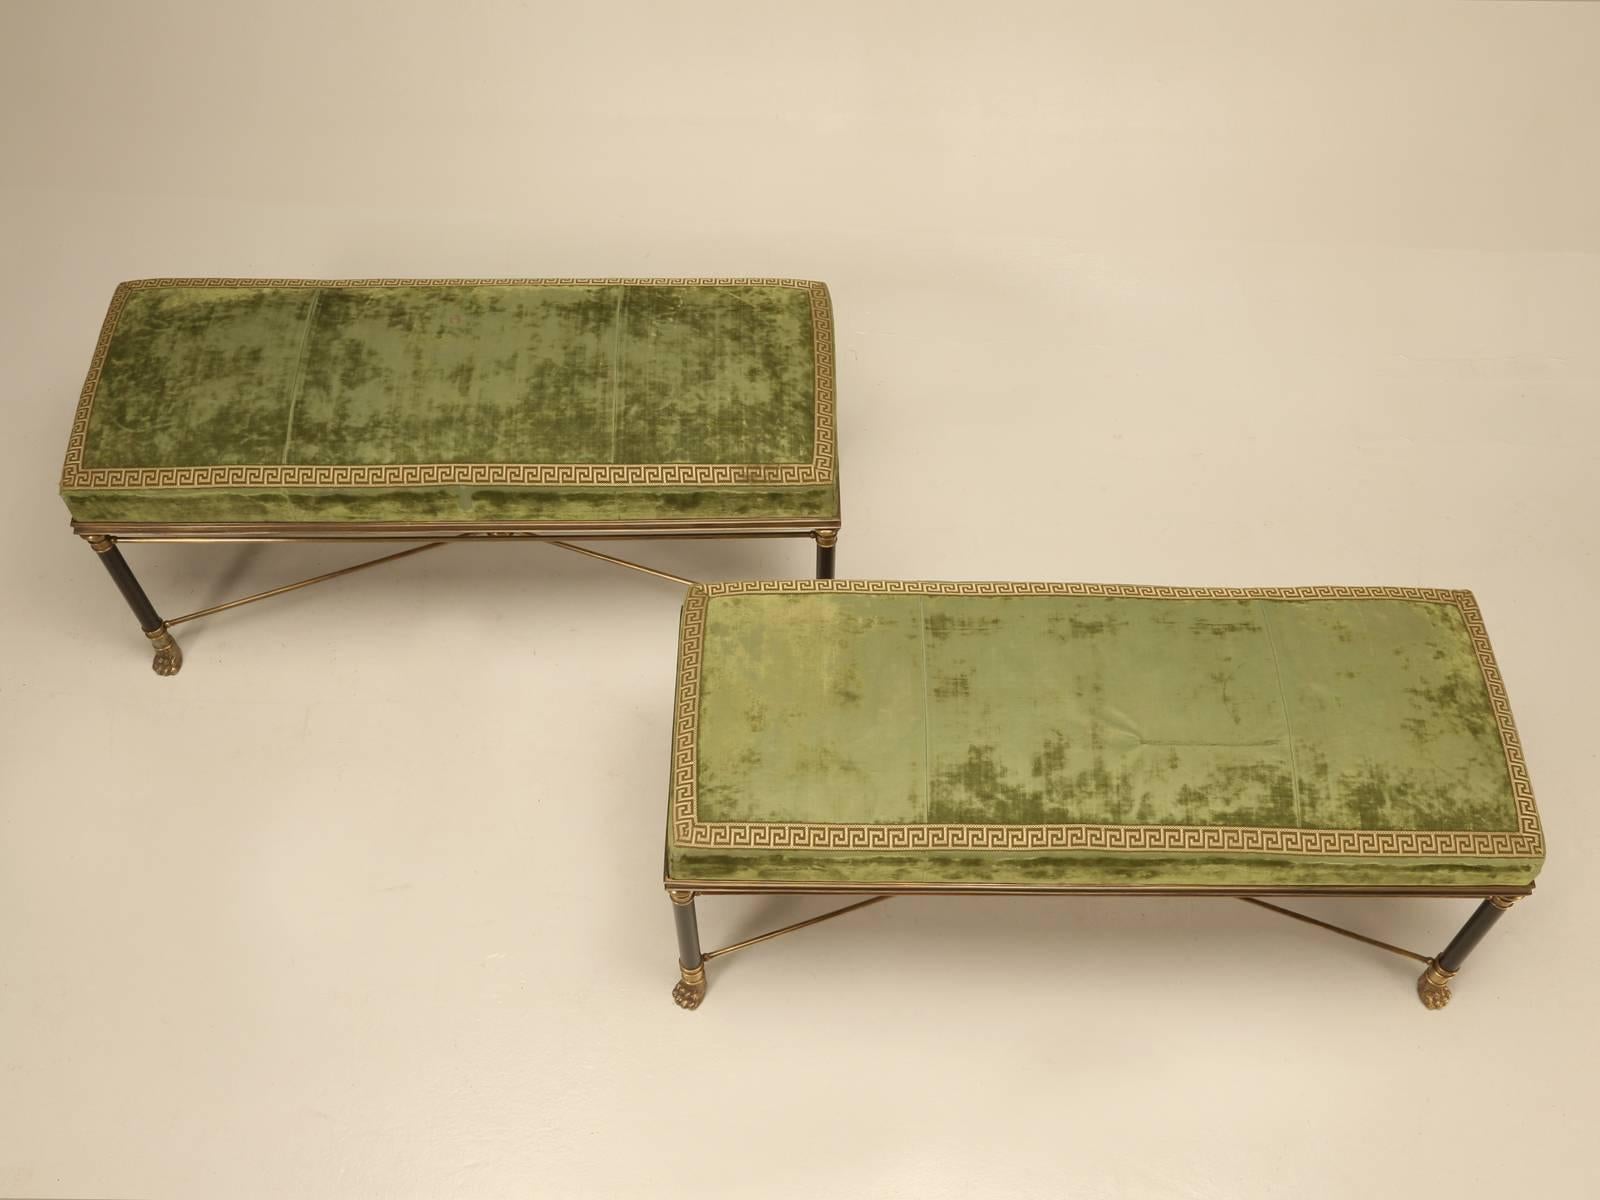 Exquisite matching pair of French bronze, brass and lacquered benches, still in their original silk velvet, with a wonderful gold Greek key edging. No, the fabric is not perfect and you can certainly see the old repairs and spots, but somehow it